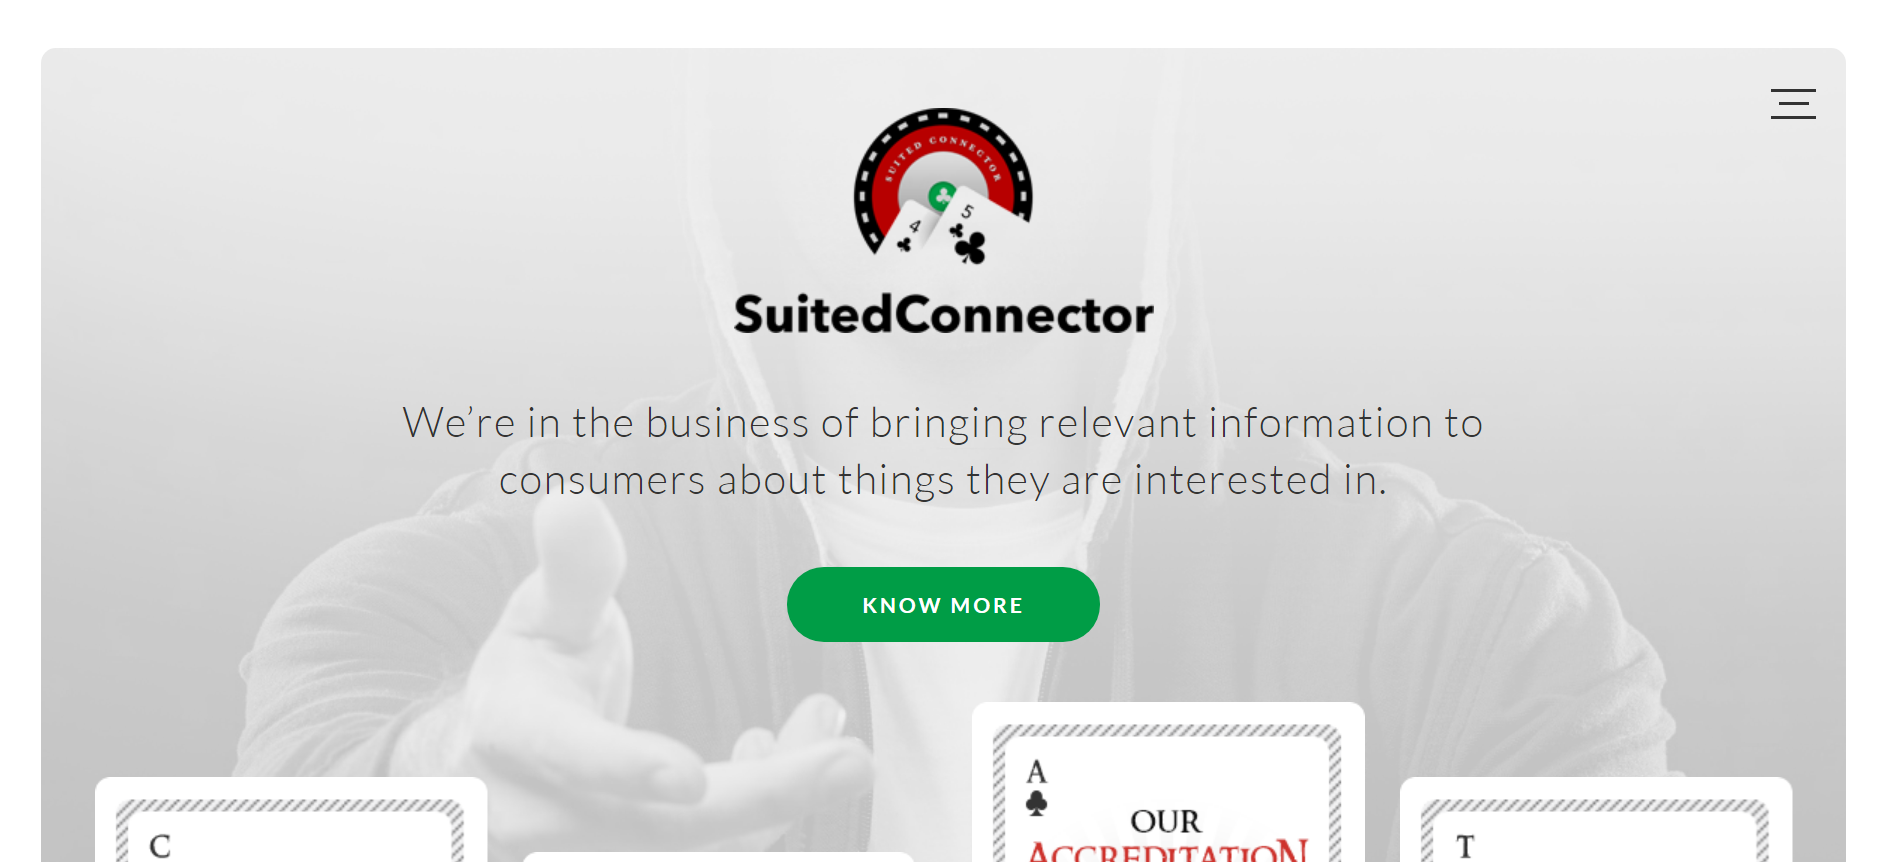 Full Site 1 - Suited Connector